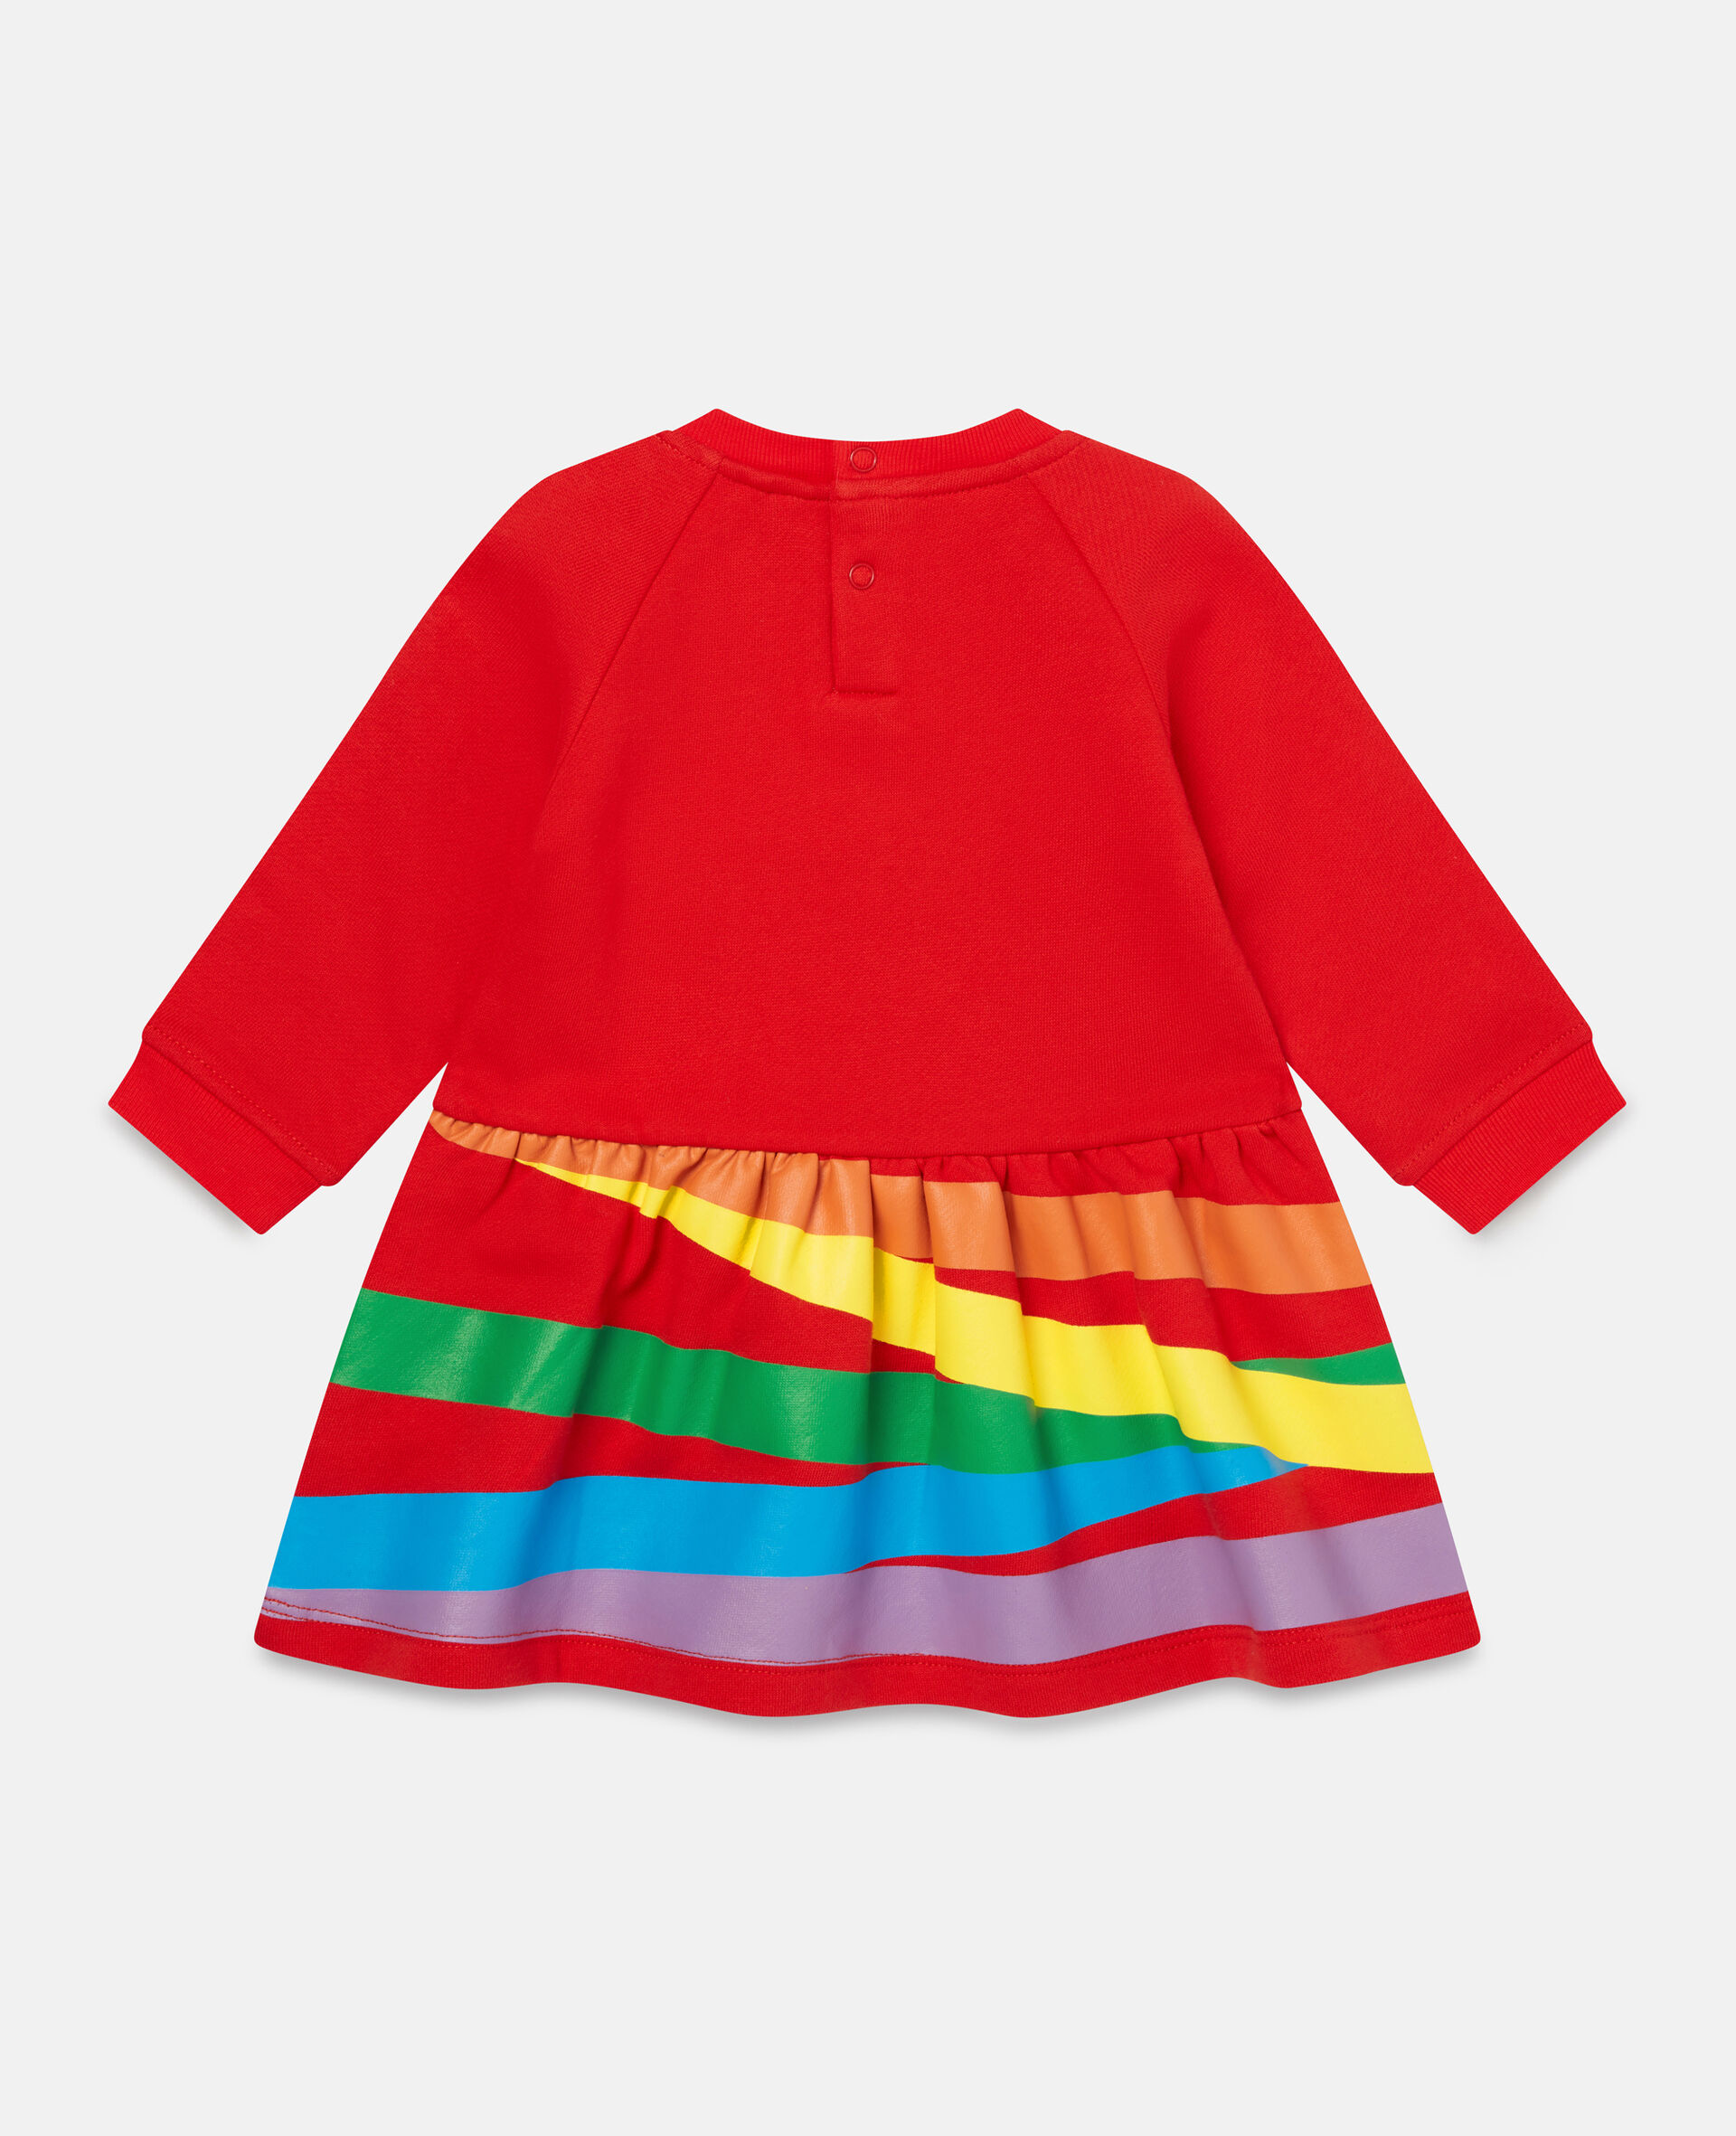 Cotton Fleece Rainbow Face Print Dress-Red-large image number 2